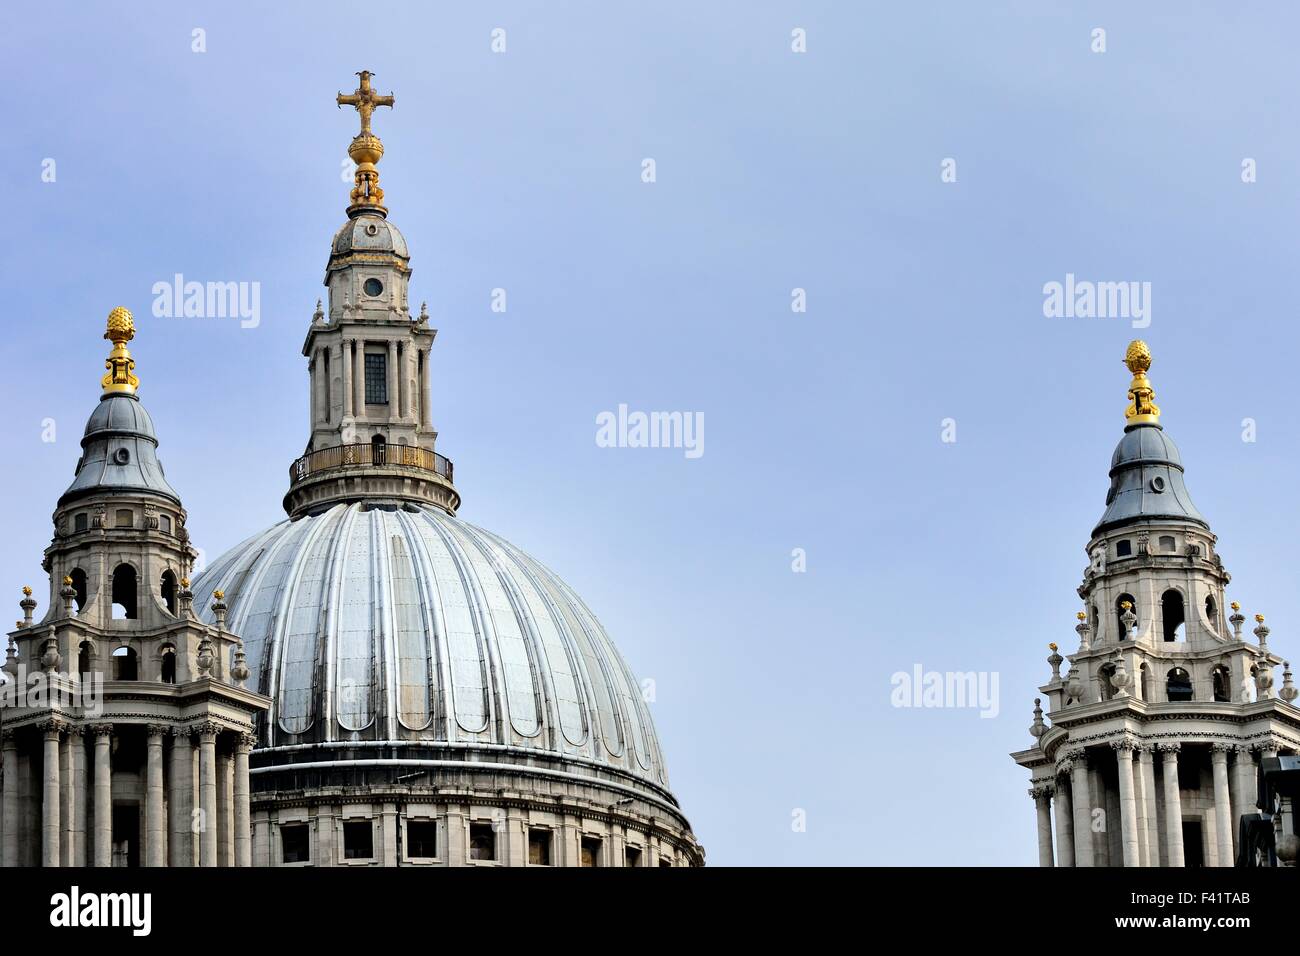 St Pauls Dome with Towers Stock Photo